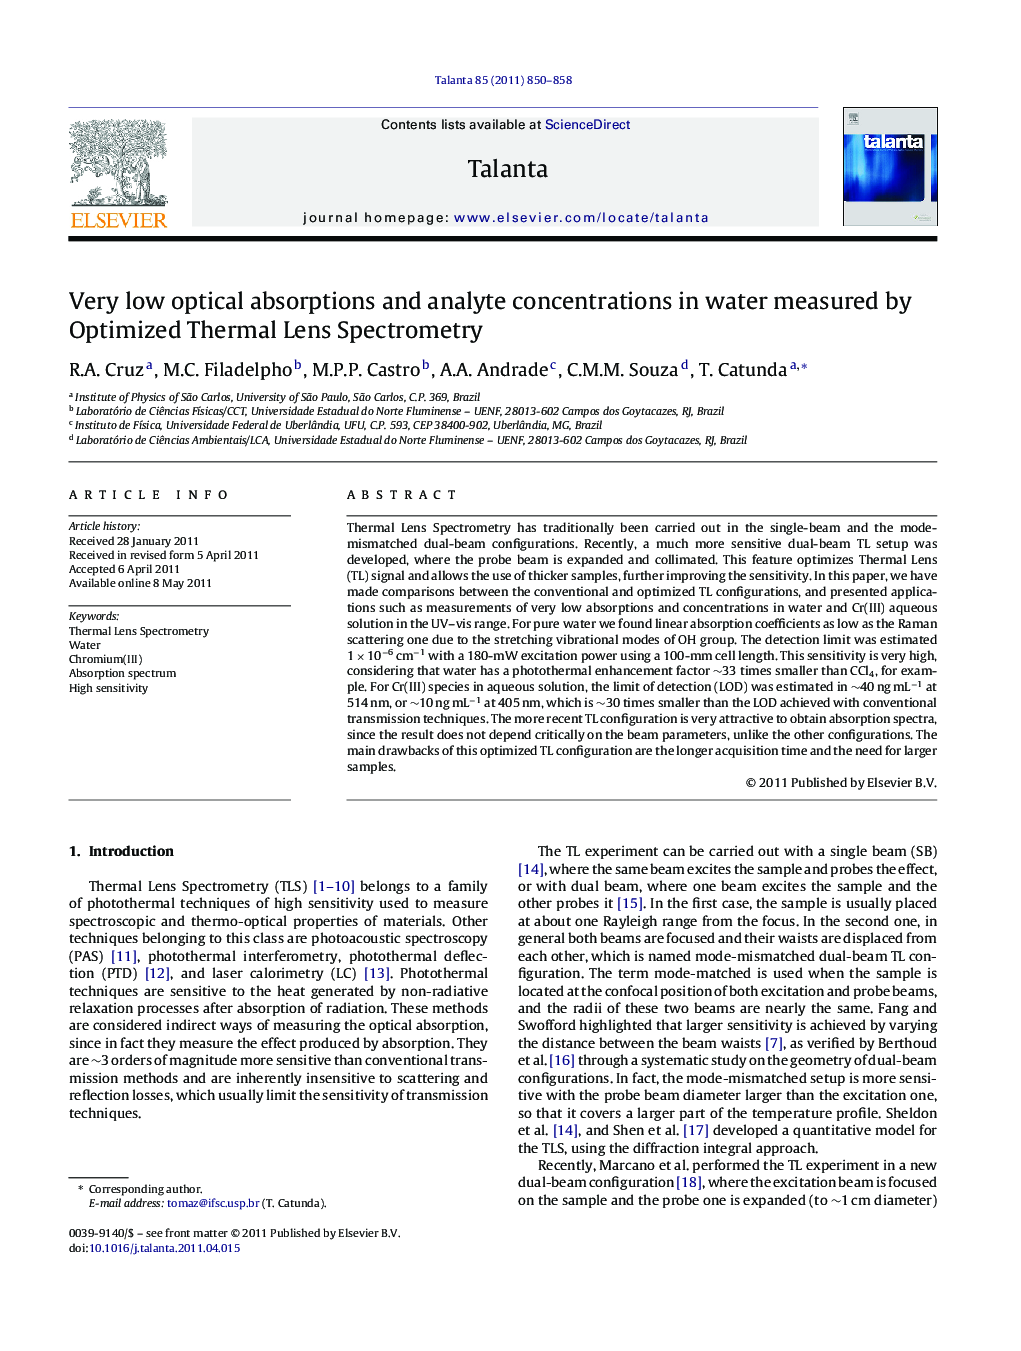 Very low optical absorptions and analyte concentrations in water measured by Optimized Thermal Lens Spectrometry